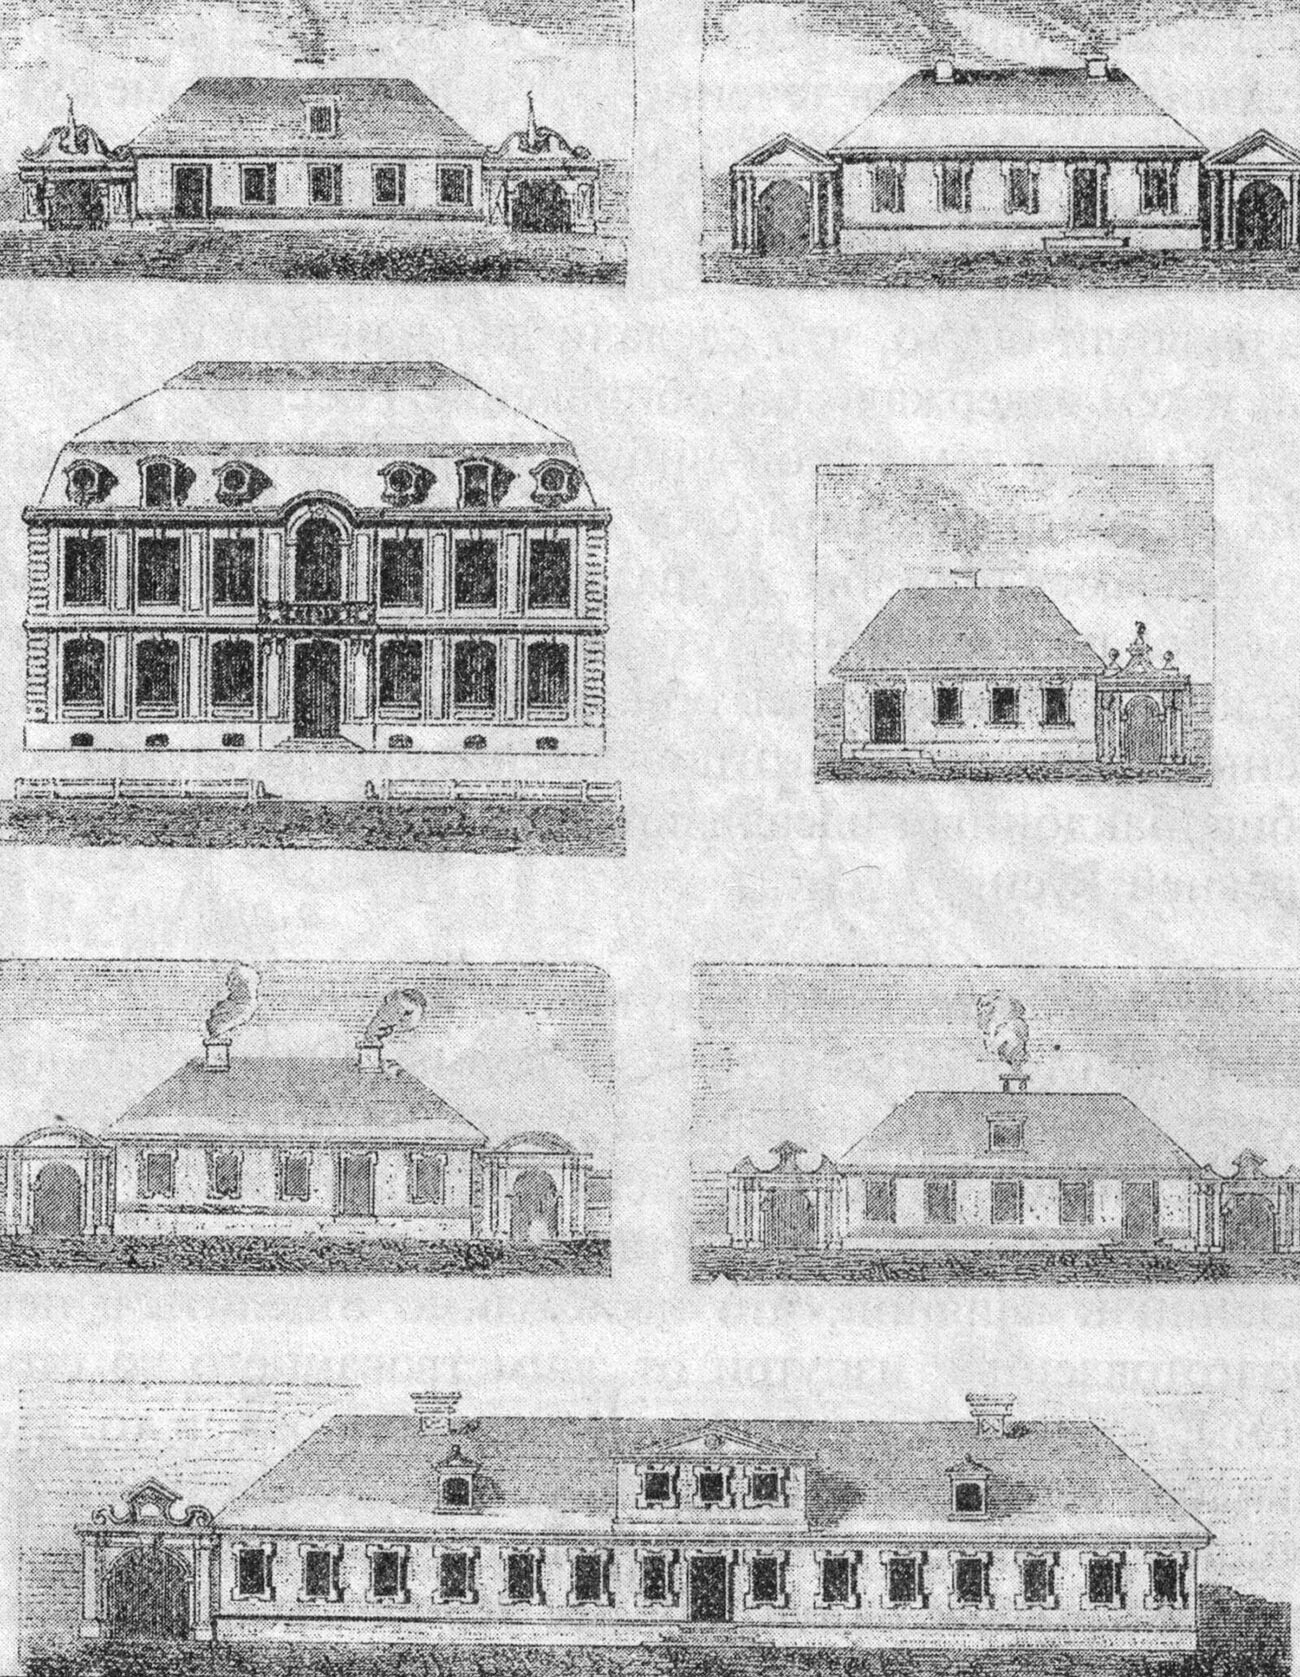 The types of houses in early St. Petersburg